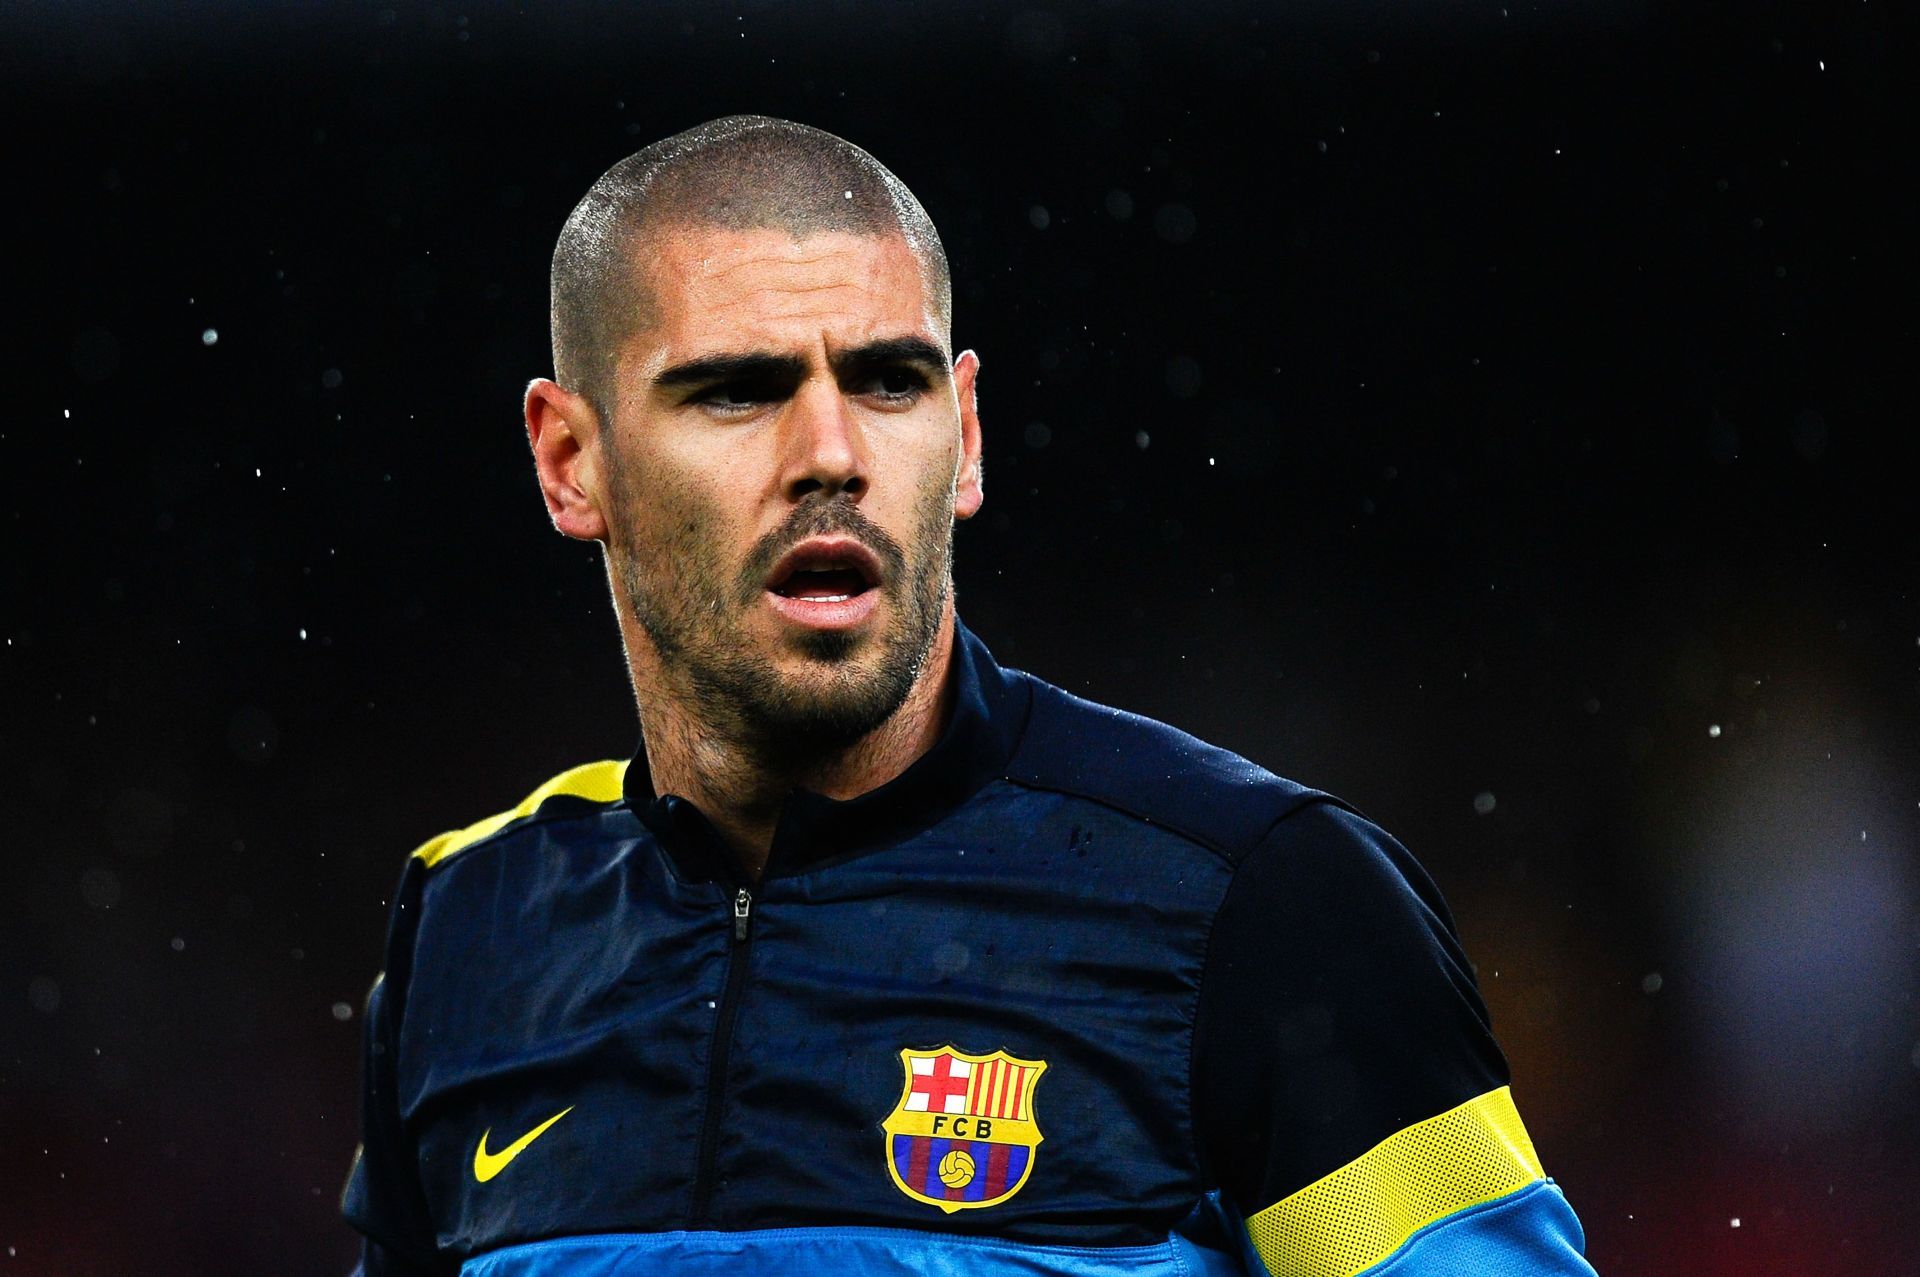 Victor Valdes featured in 28 El Classicos and won 14 of them